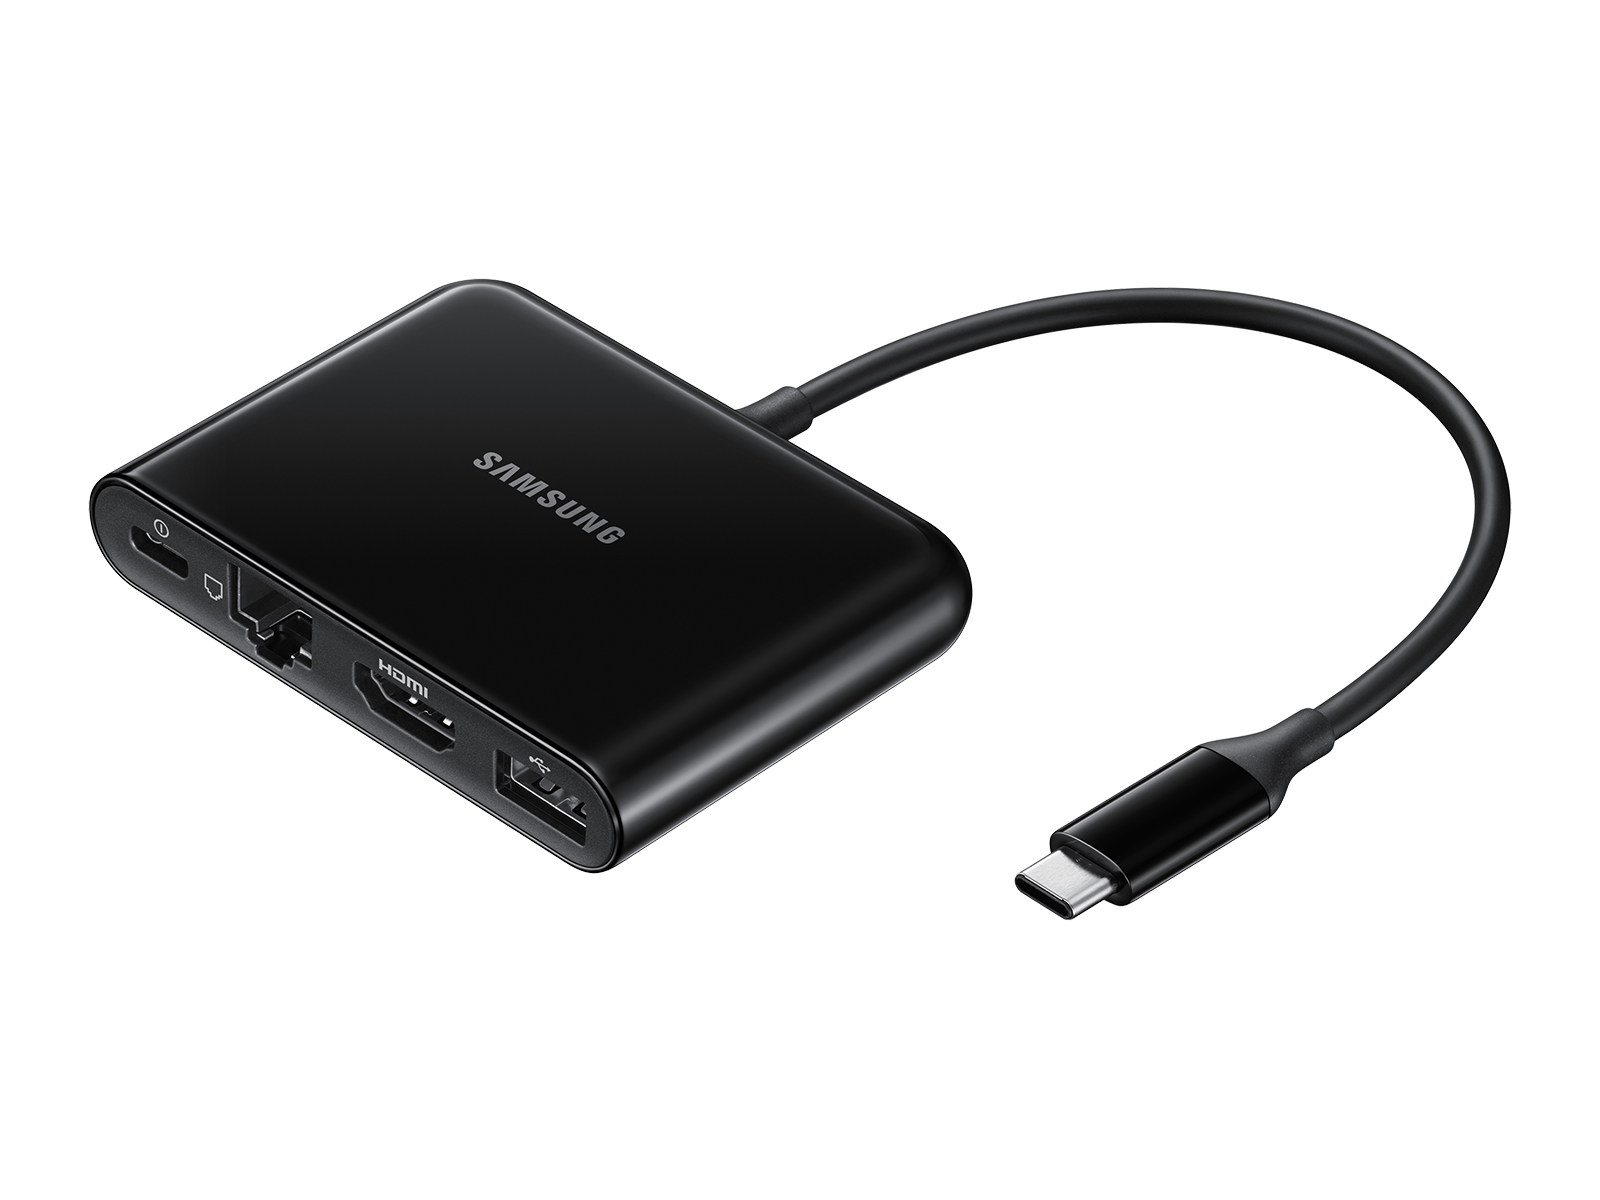 PRO OTG Power Cable Works for Samsung GT-I9060 with Power Connect to Any Compatible USB Accessory with MicroUSB 